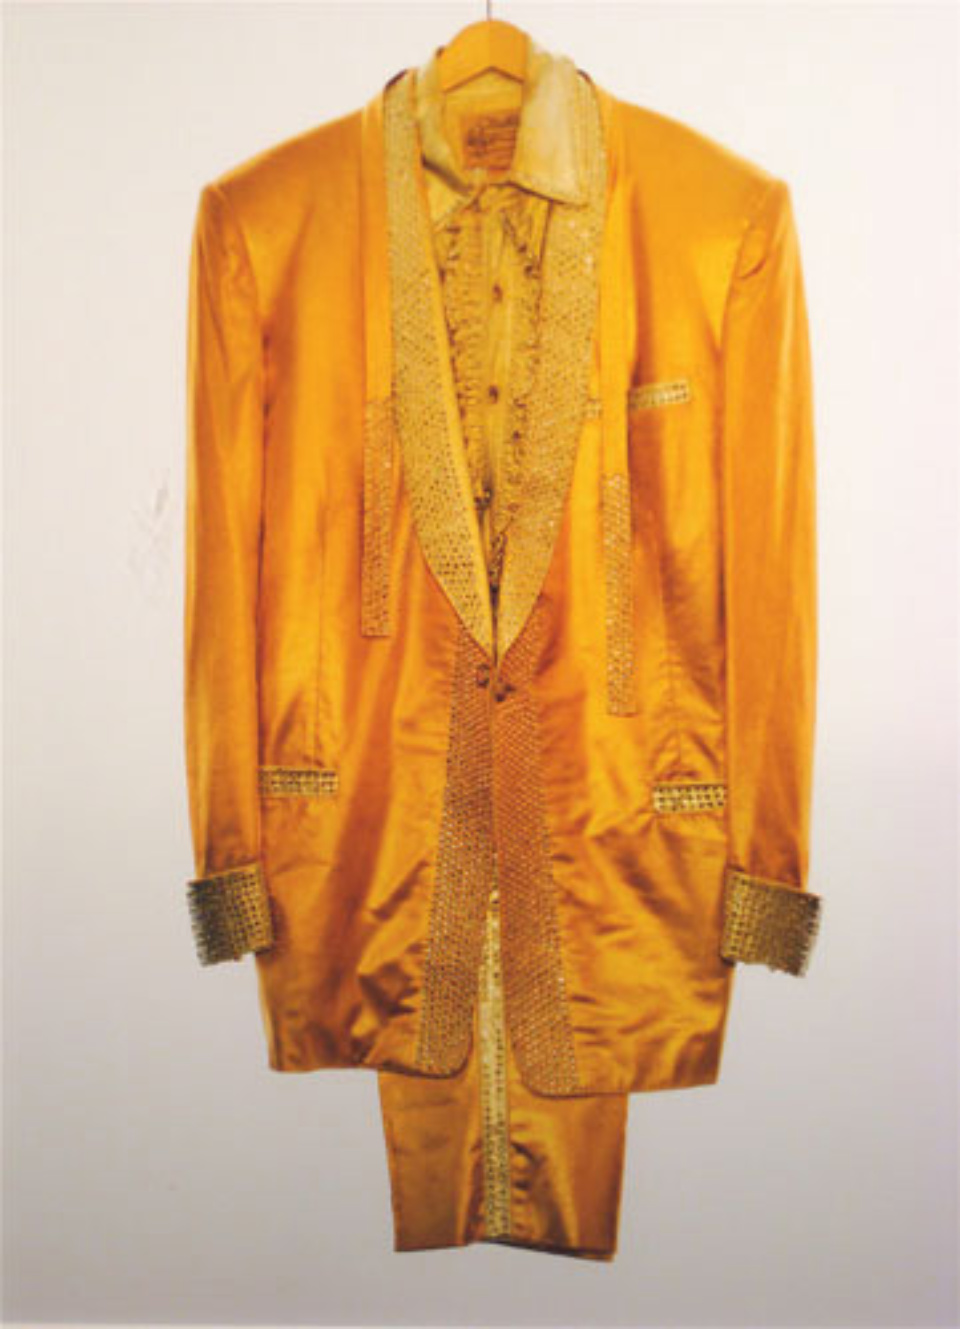 Albert Watson: Elvis Presley's Gold Lamé Suit Graceland, Memphis 1991 C-print Signed, titled, dated and numbered on verso Ed. 25